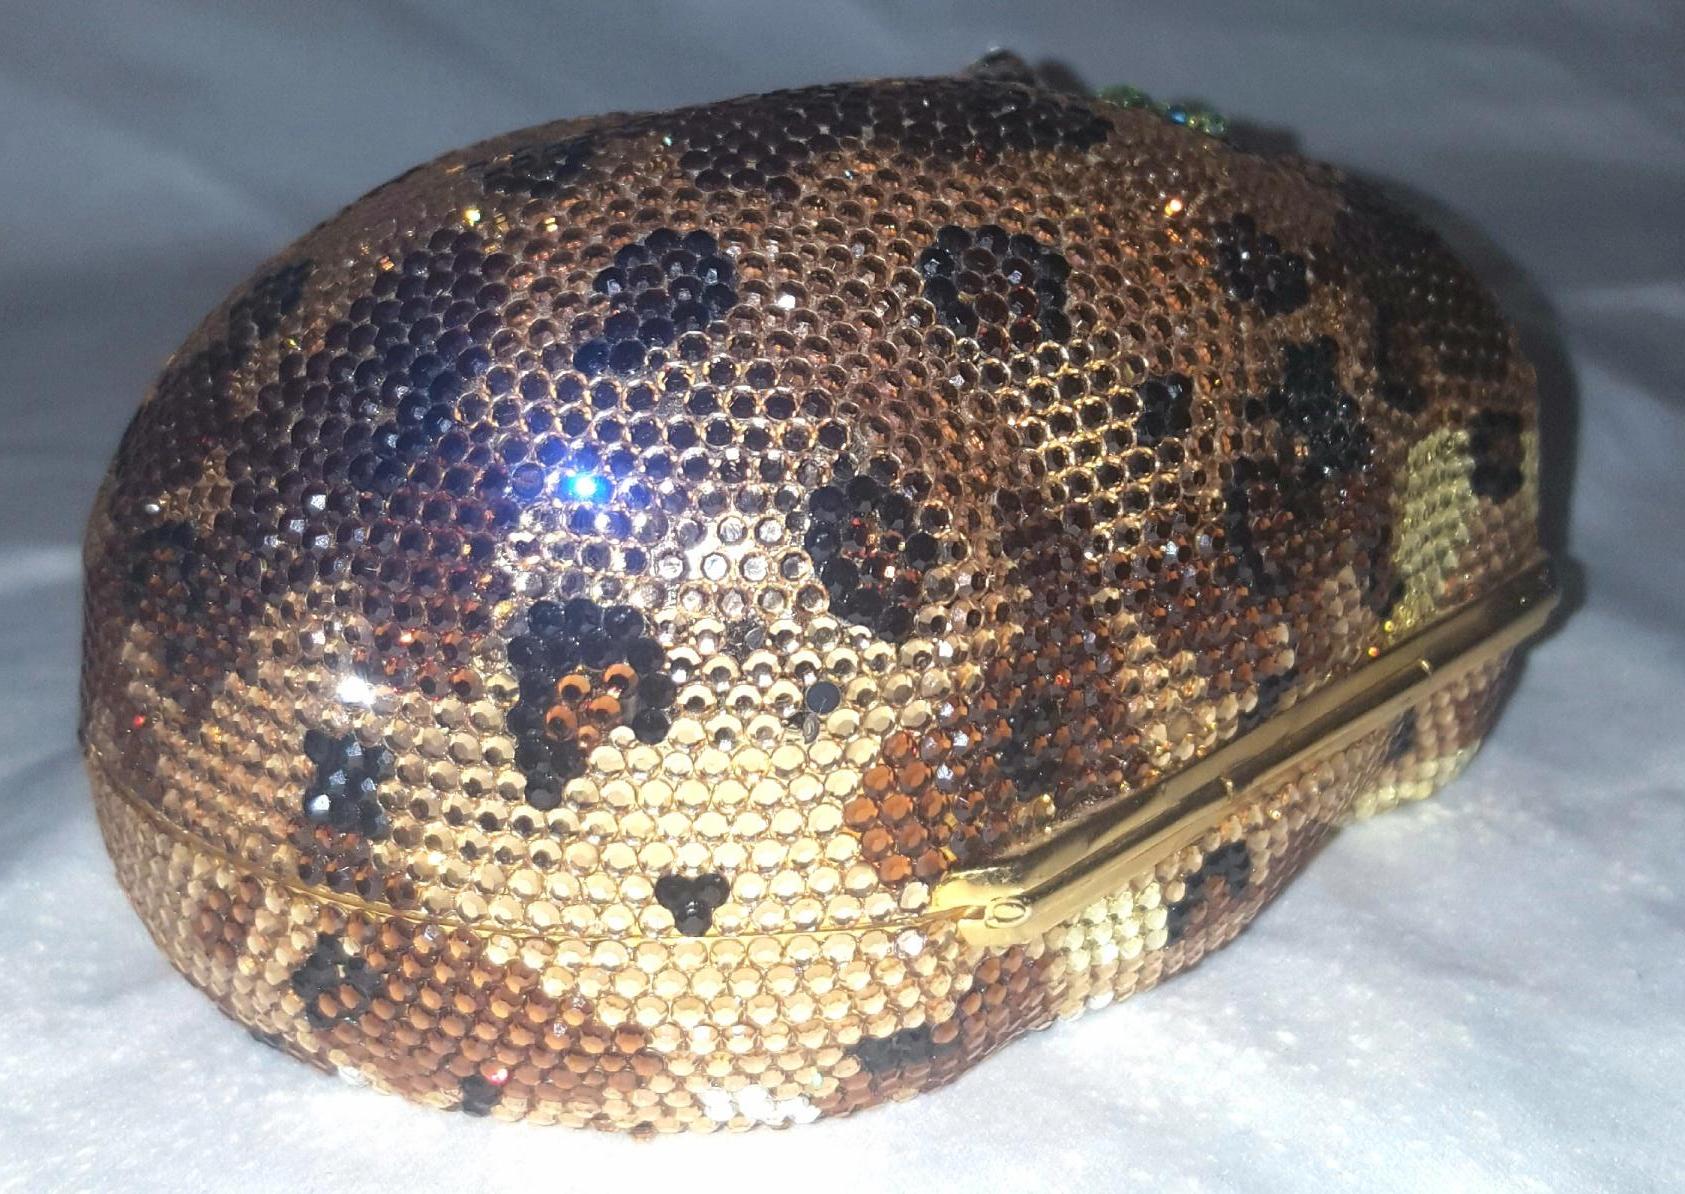 Kathrine Baumann limited edition handmade clutch #14 of 500, Swarovski crystals features a leather interior. Click clasp closure. It’s a leopard kitten cub with a little turquoise bow collar!  Absolutely stunning and adorable.  It's in mint